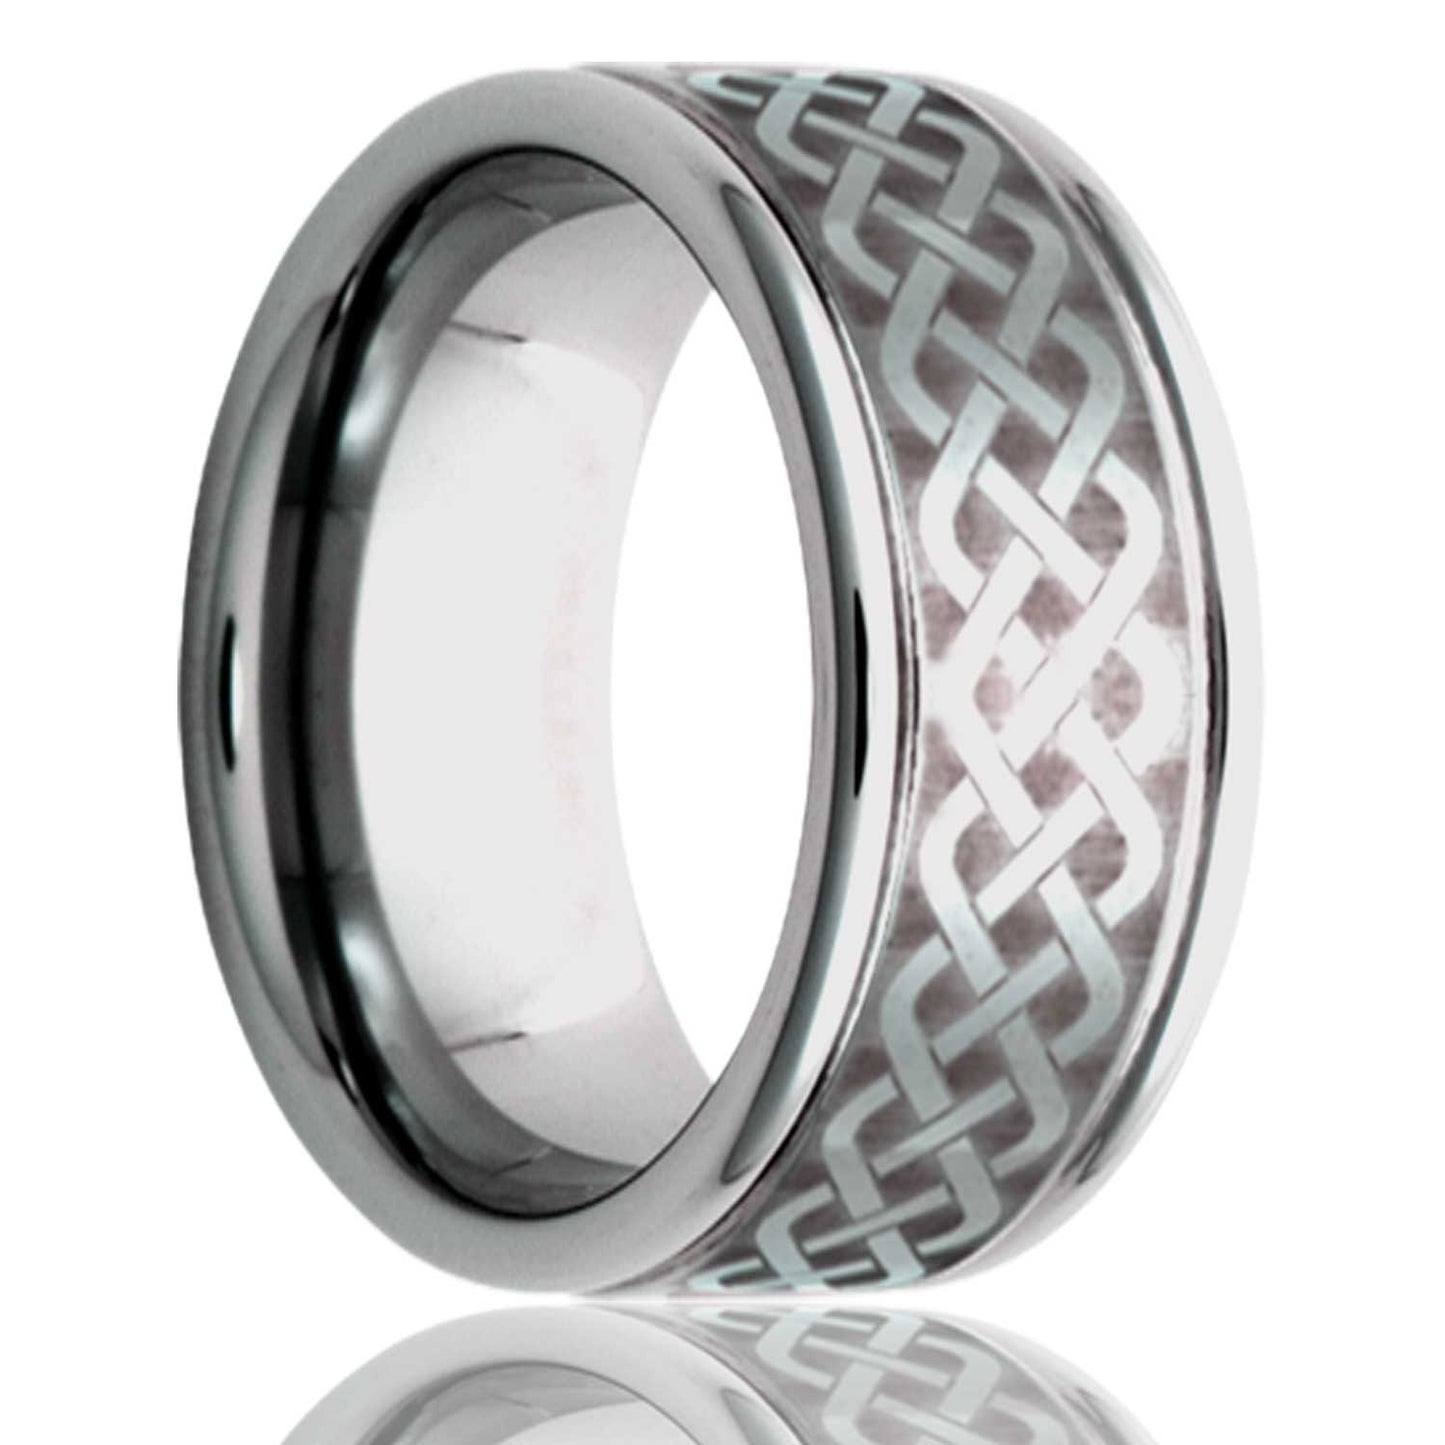 A celtic sailor's knot grooved titanium wedding band displayed on a neutral white background.